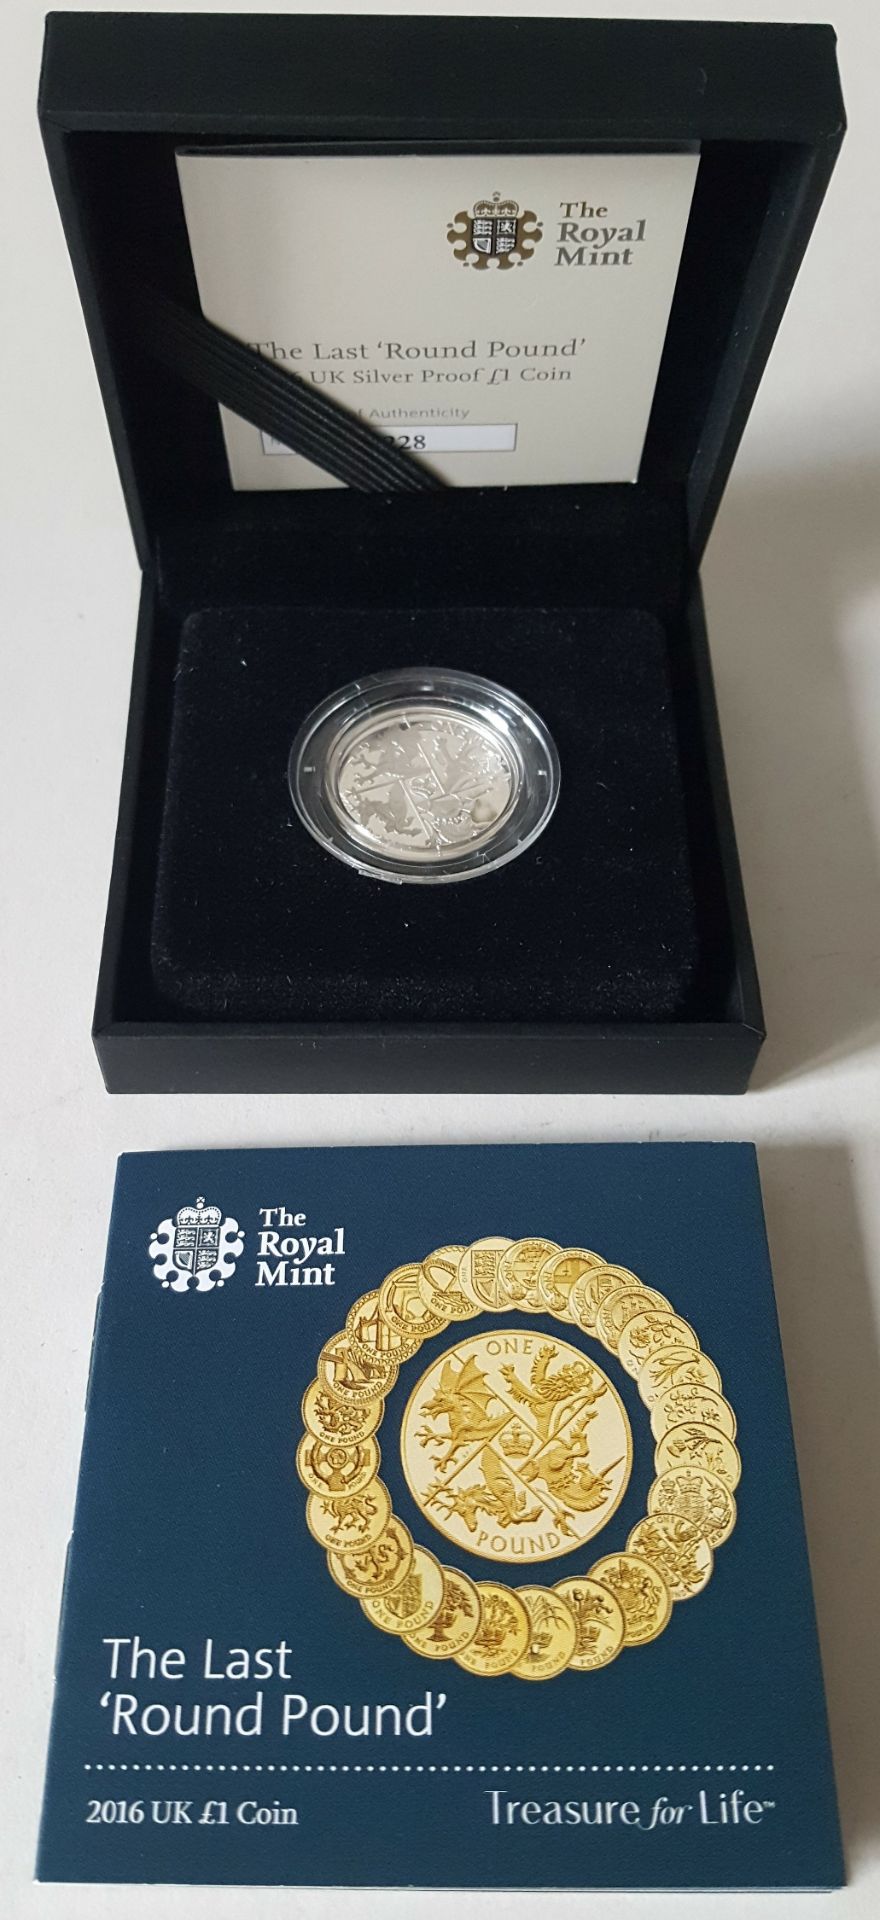 Limited Edition Collectable Coin Silver proof Royal Mint 'The Last Round Pound' - Image 2 of 5